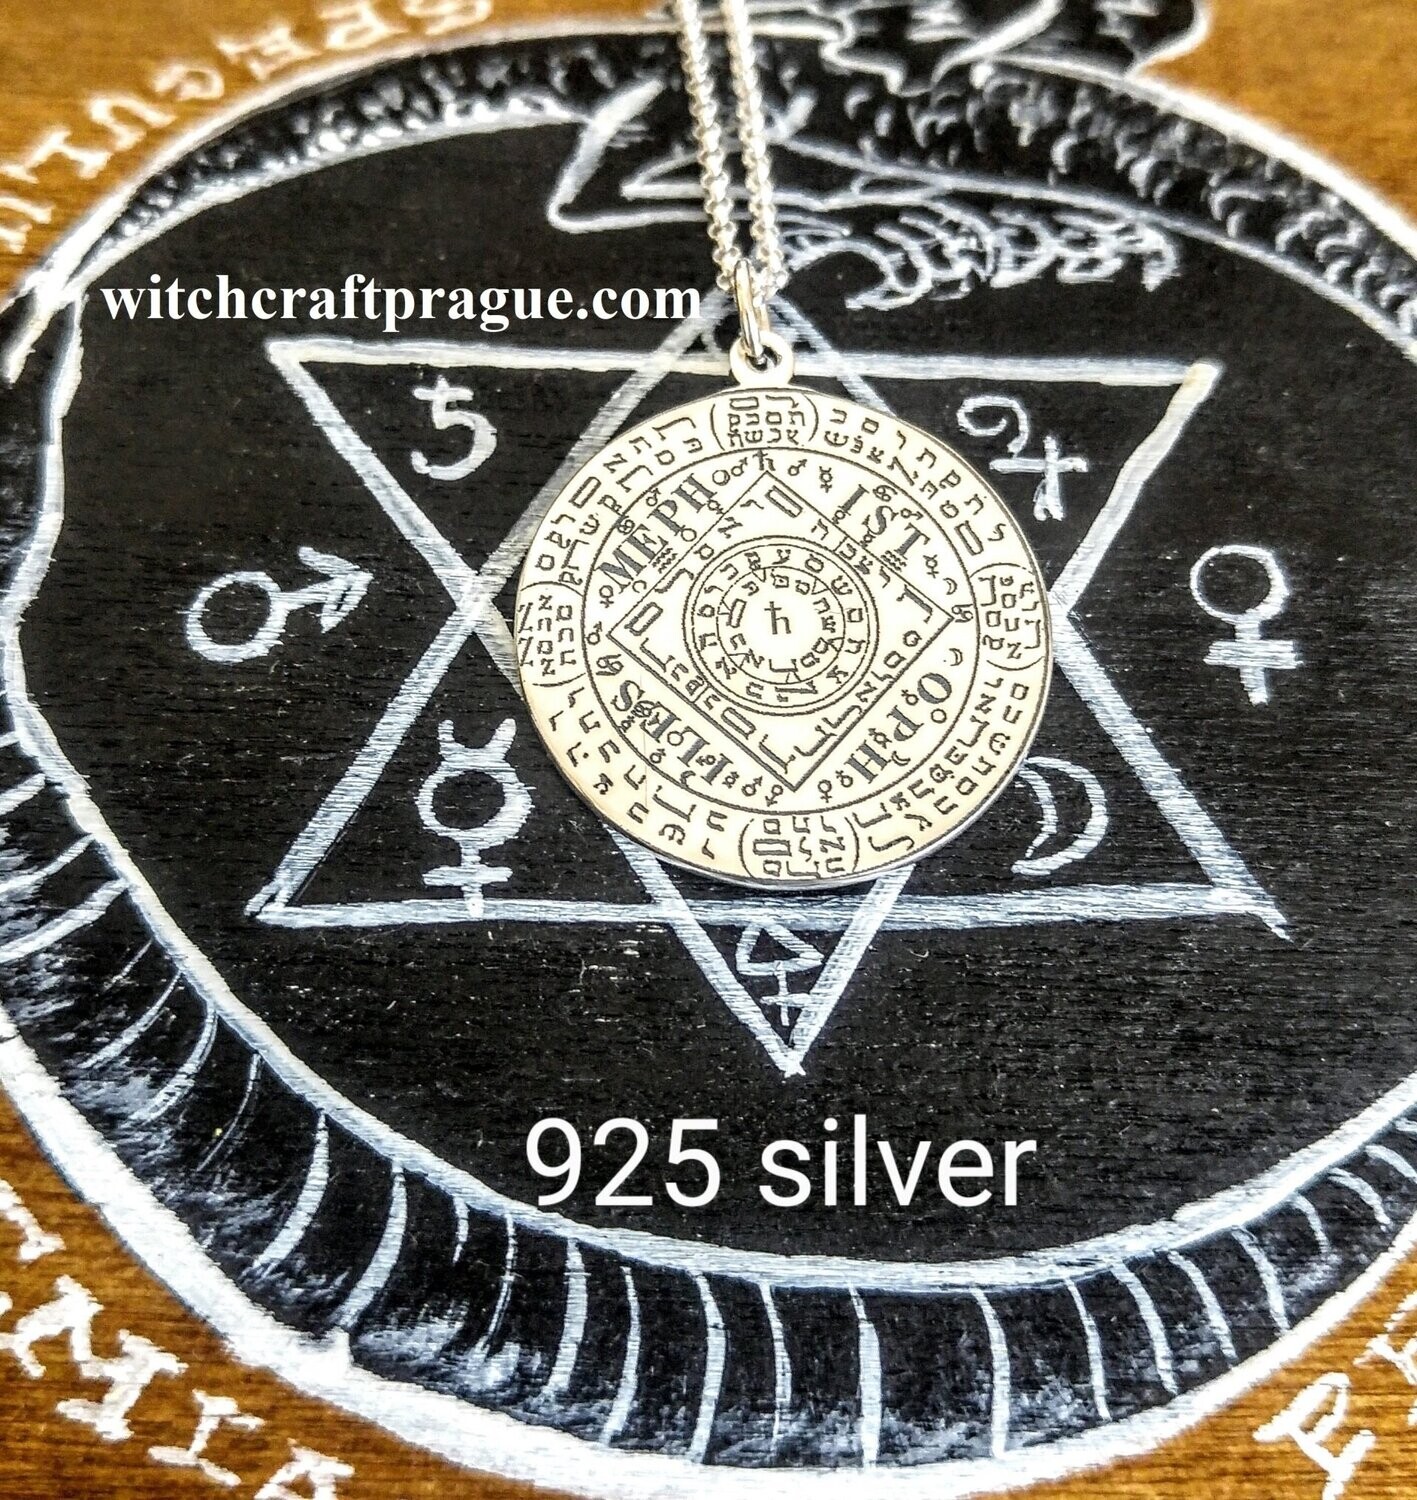 Mephistopheles seal necklace amulet